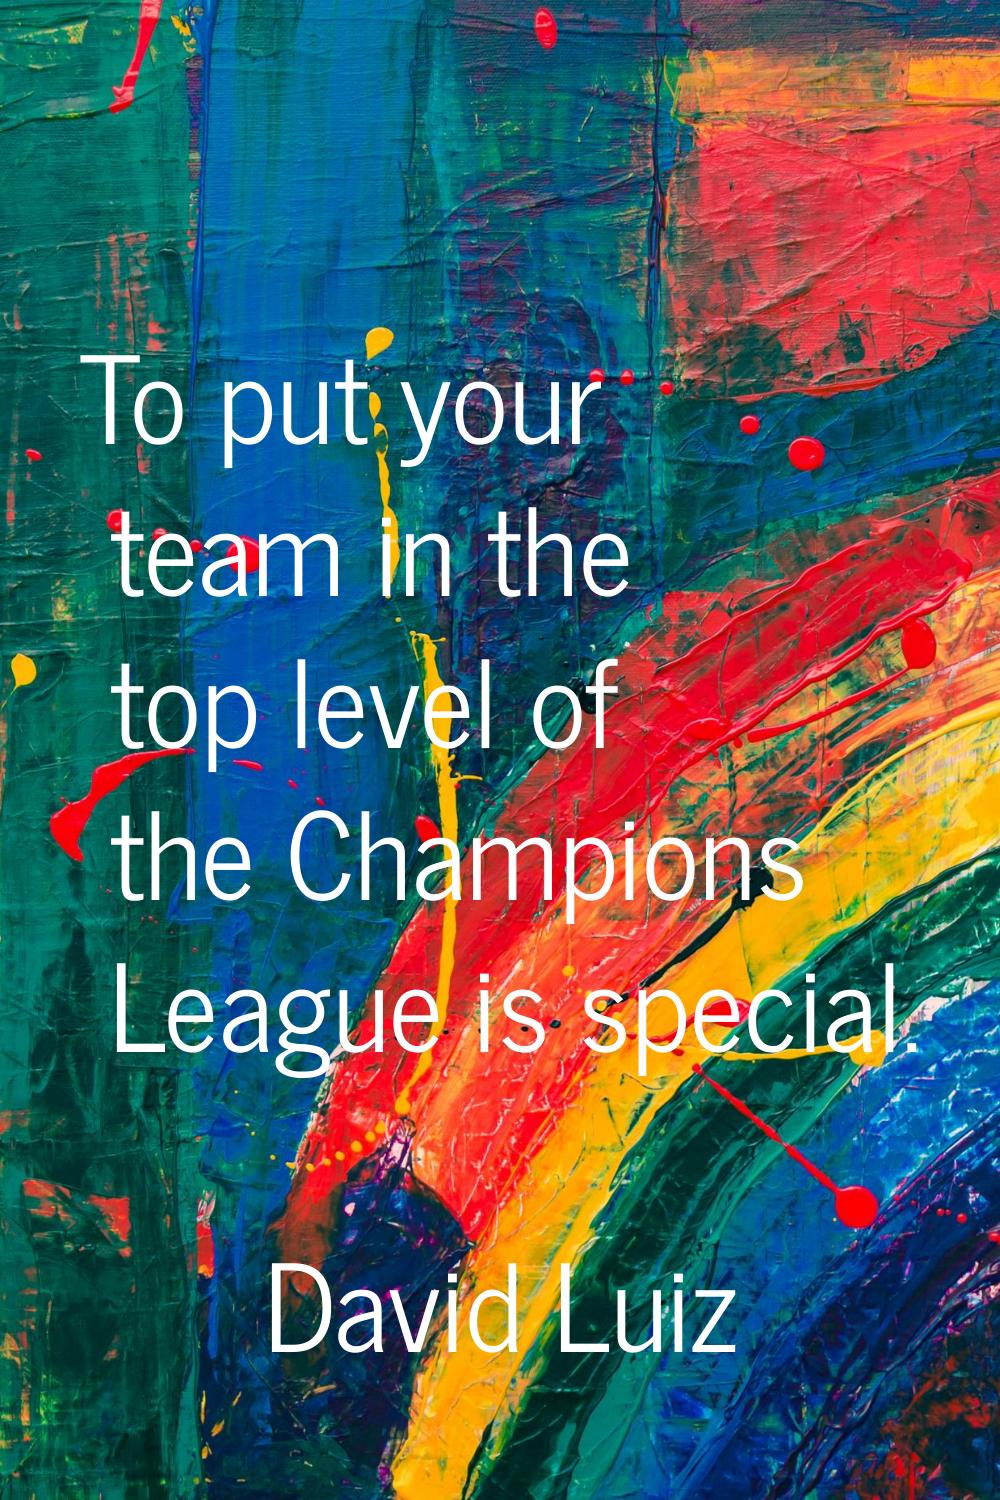 To put your team in the top level of the Champions League is special.